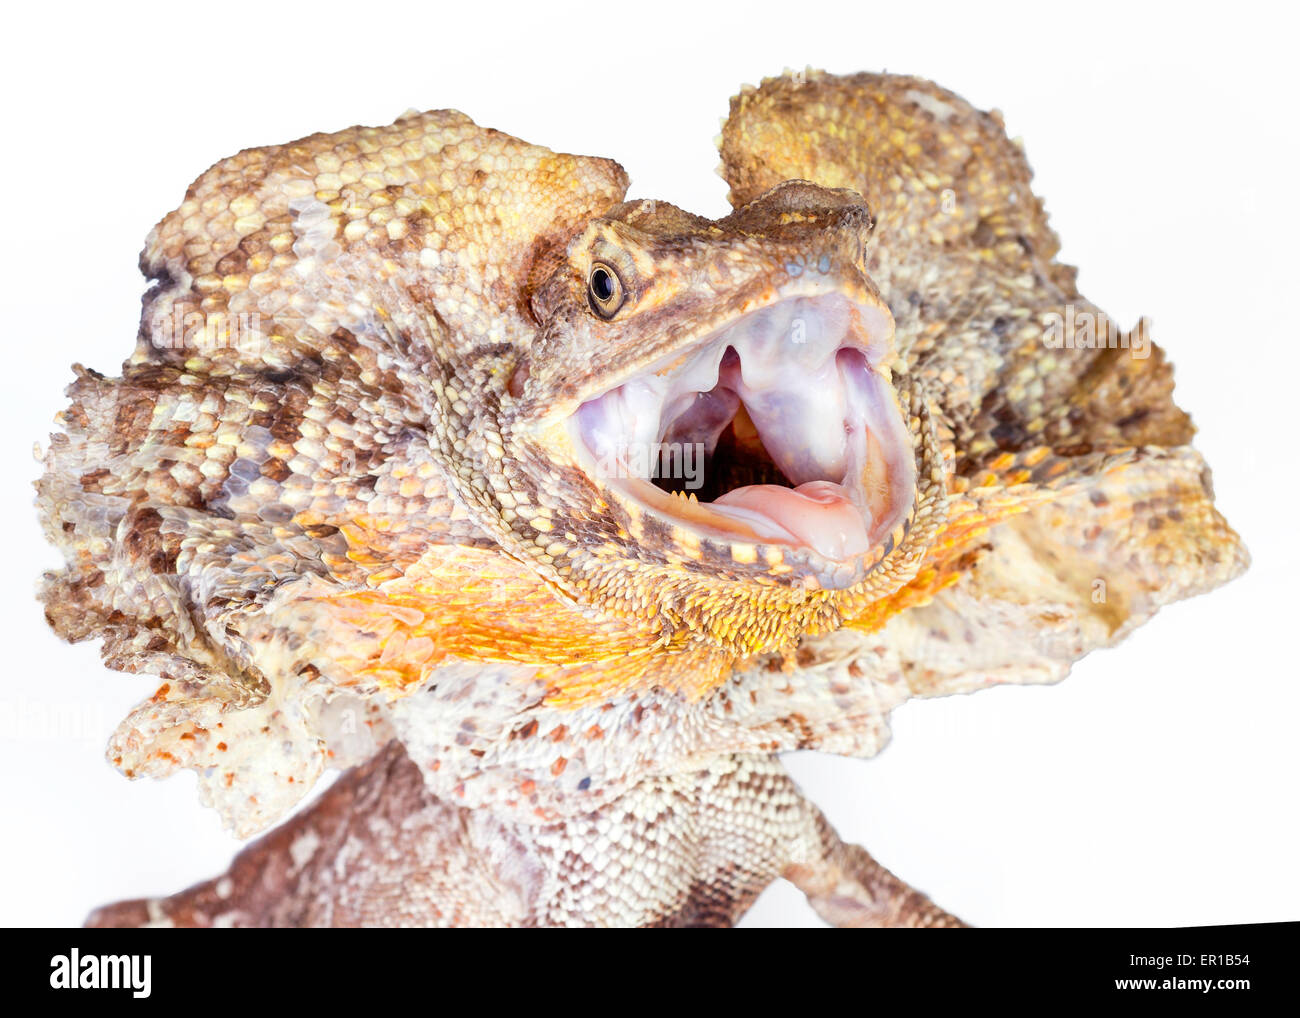 a frilled neck lizard on a white background, in a threatened position Stock Photo